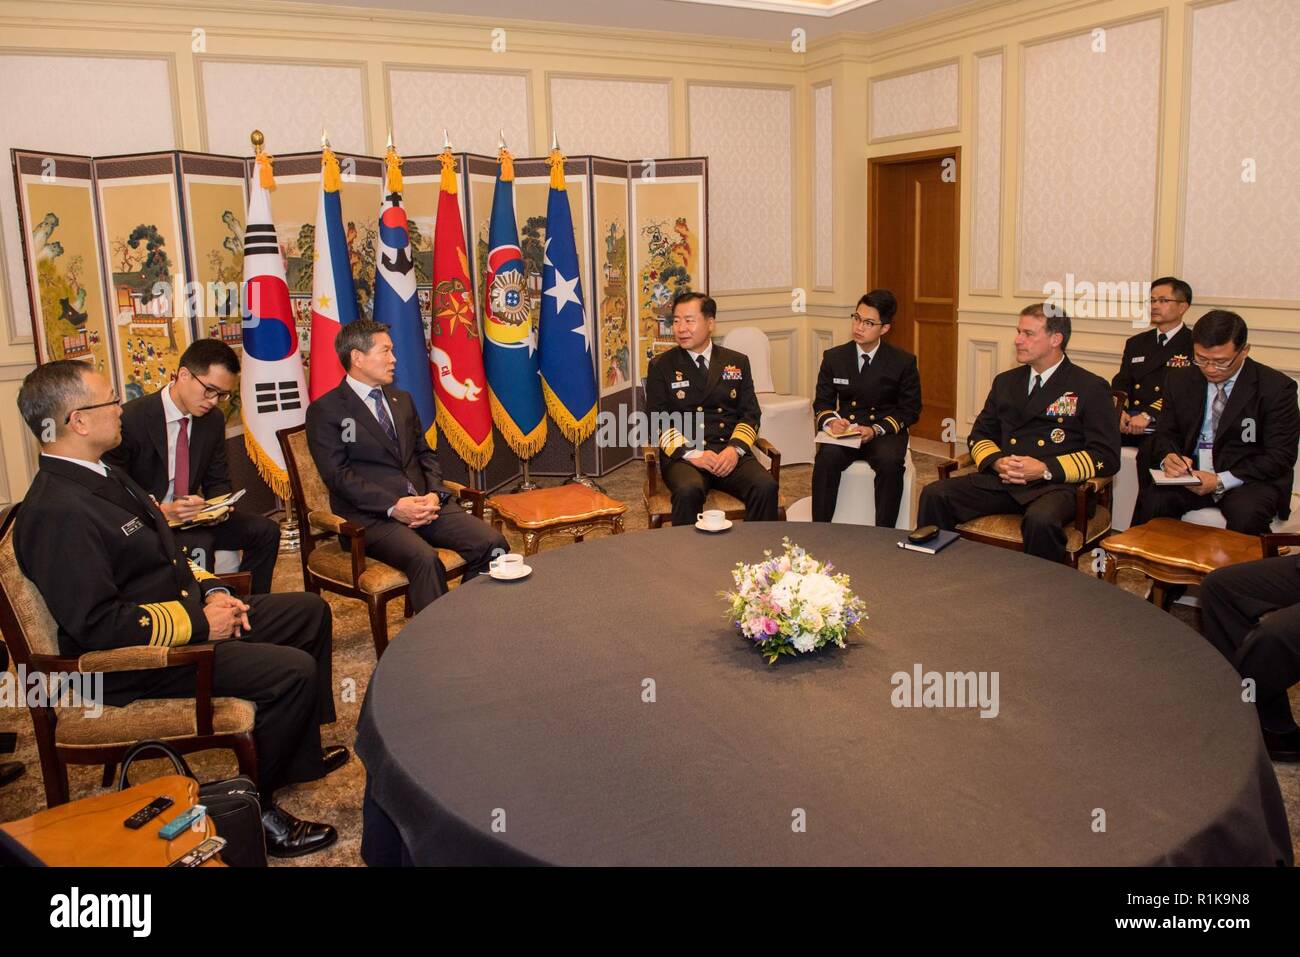 JEJU ISLAND, Republic of Korea, Republic of Korea (Oct. 12, 2018) Minister Jeong, Kyeong-doo, Republic of Korea (ROK) minister of national defense speaks with ROK Navy Chief of Naval Operations Adm. Sim, Seung-seob (center), Adm. Yutaka Murakawa, chief of maritime staff for Japan Maritime Self-Defense Force (left), and Adm. John Aquilino, commander, U.S. Pacific Fleet (right), during an office call in Jeju. Aquilino is visiting the ROK to observe the 2018 ROK International Fleet review as well as attend the 2018 Western Pacific Naval Symposium being hosted by the ROK Navy. Stock Photo